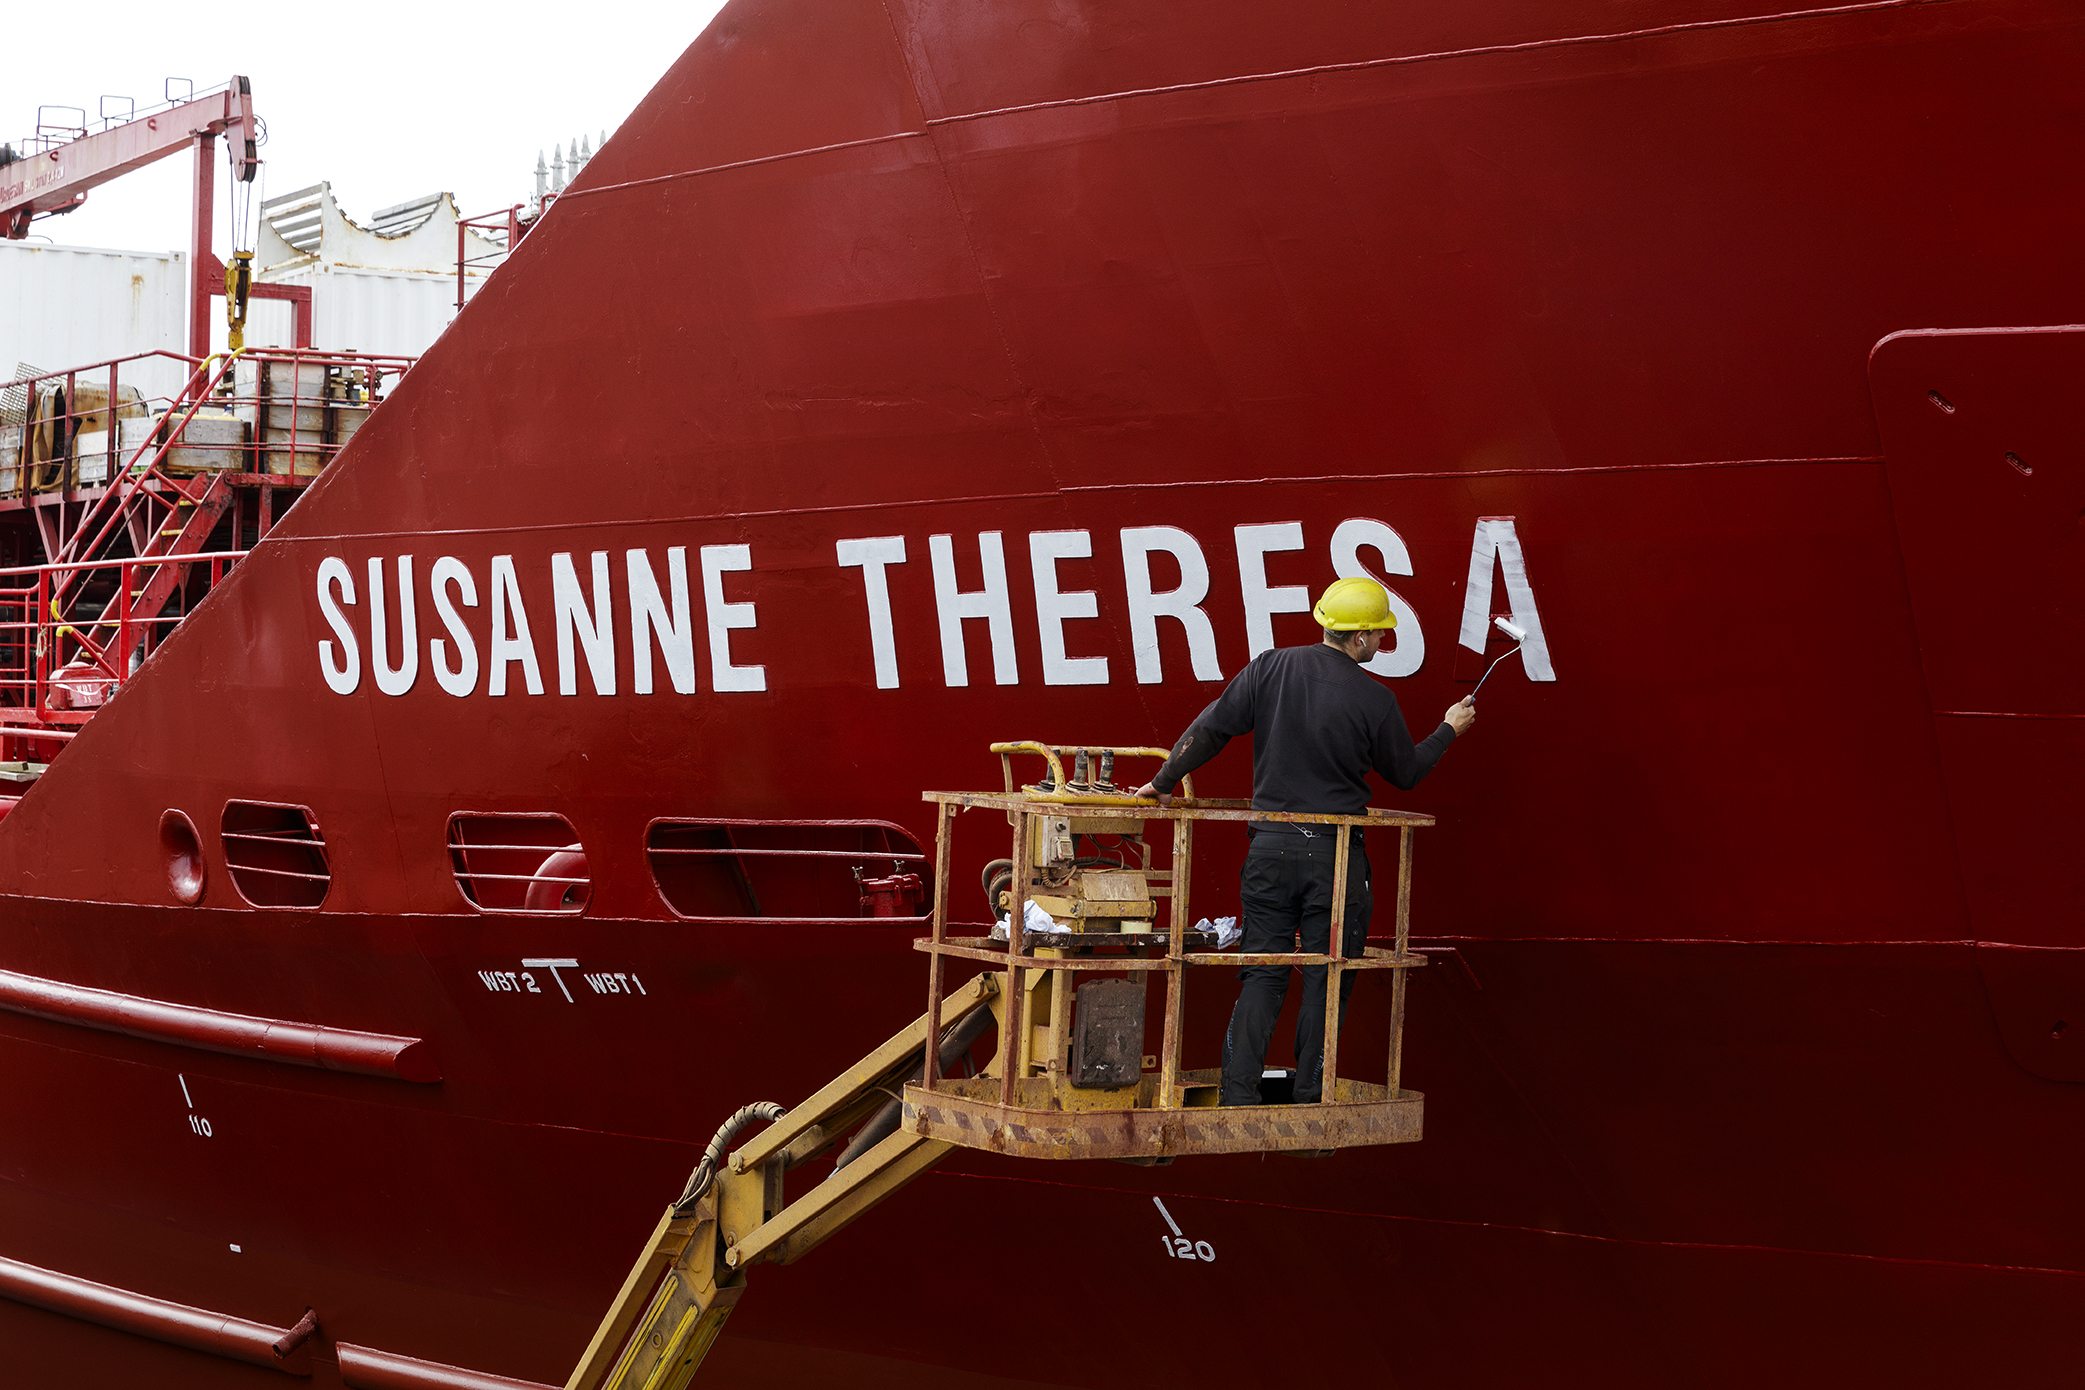 As a very visible upgrade, Susanne Theresa received a fresh coat of paint during her dock stay at Ærø Shipyard.